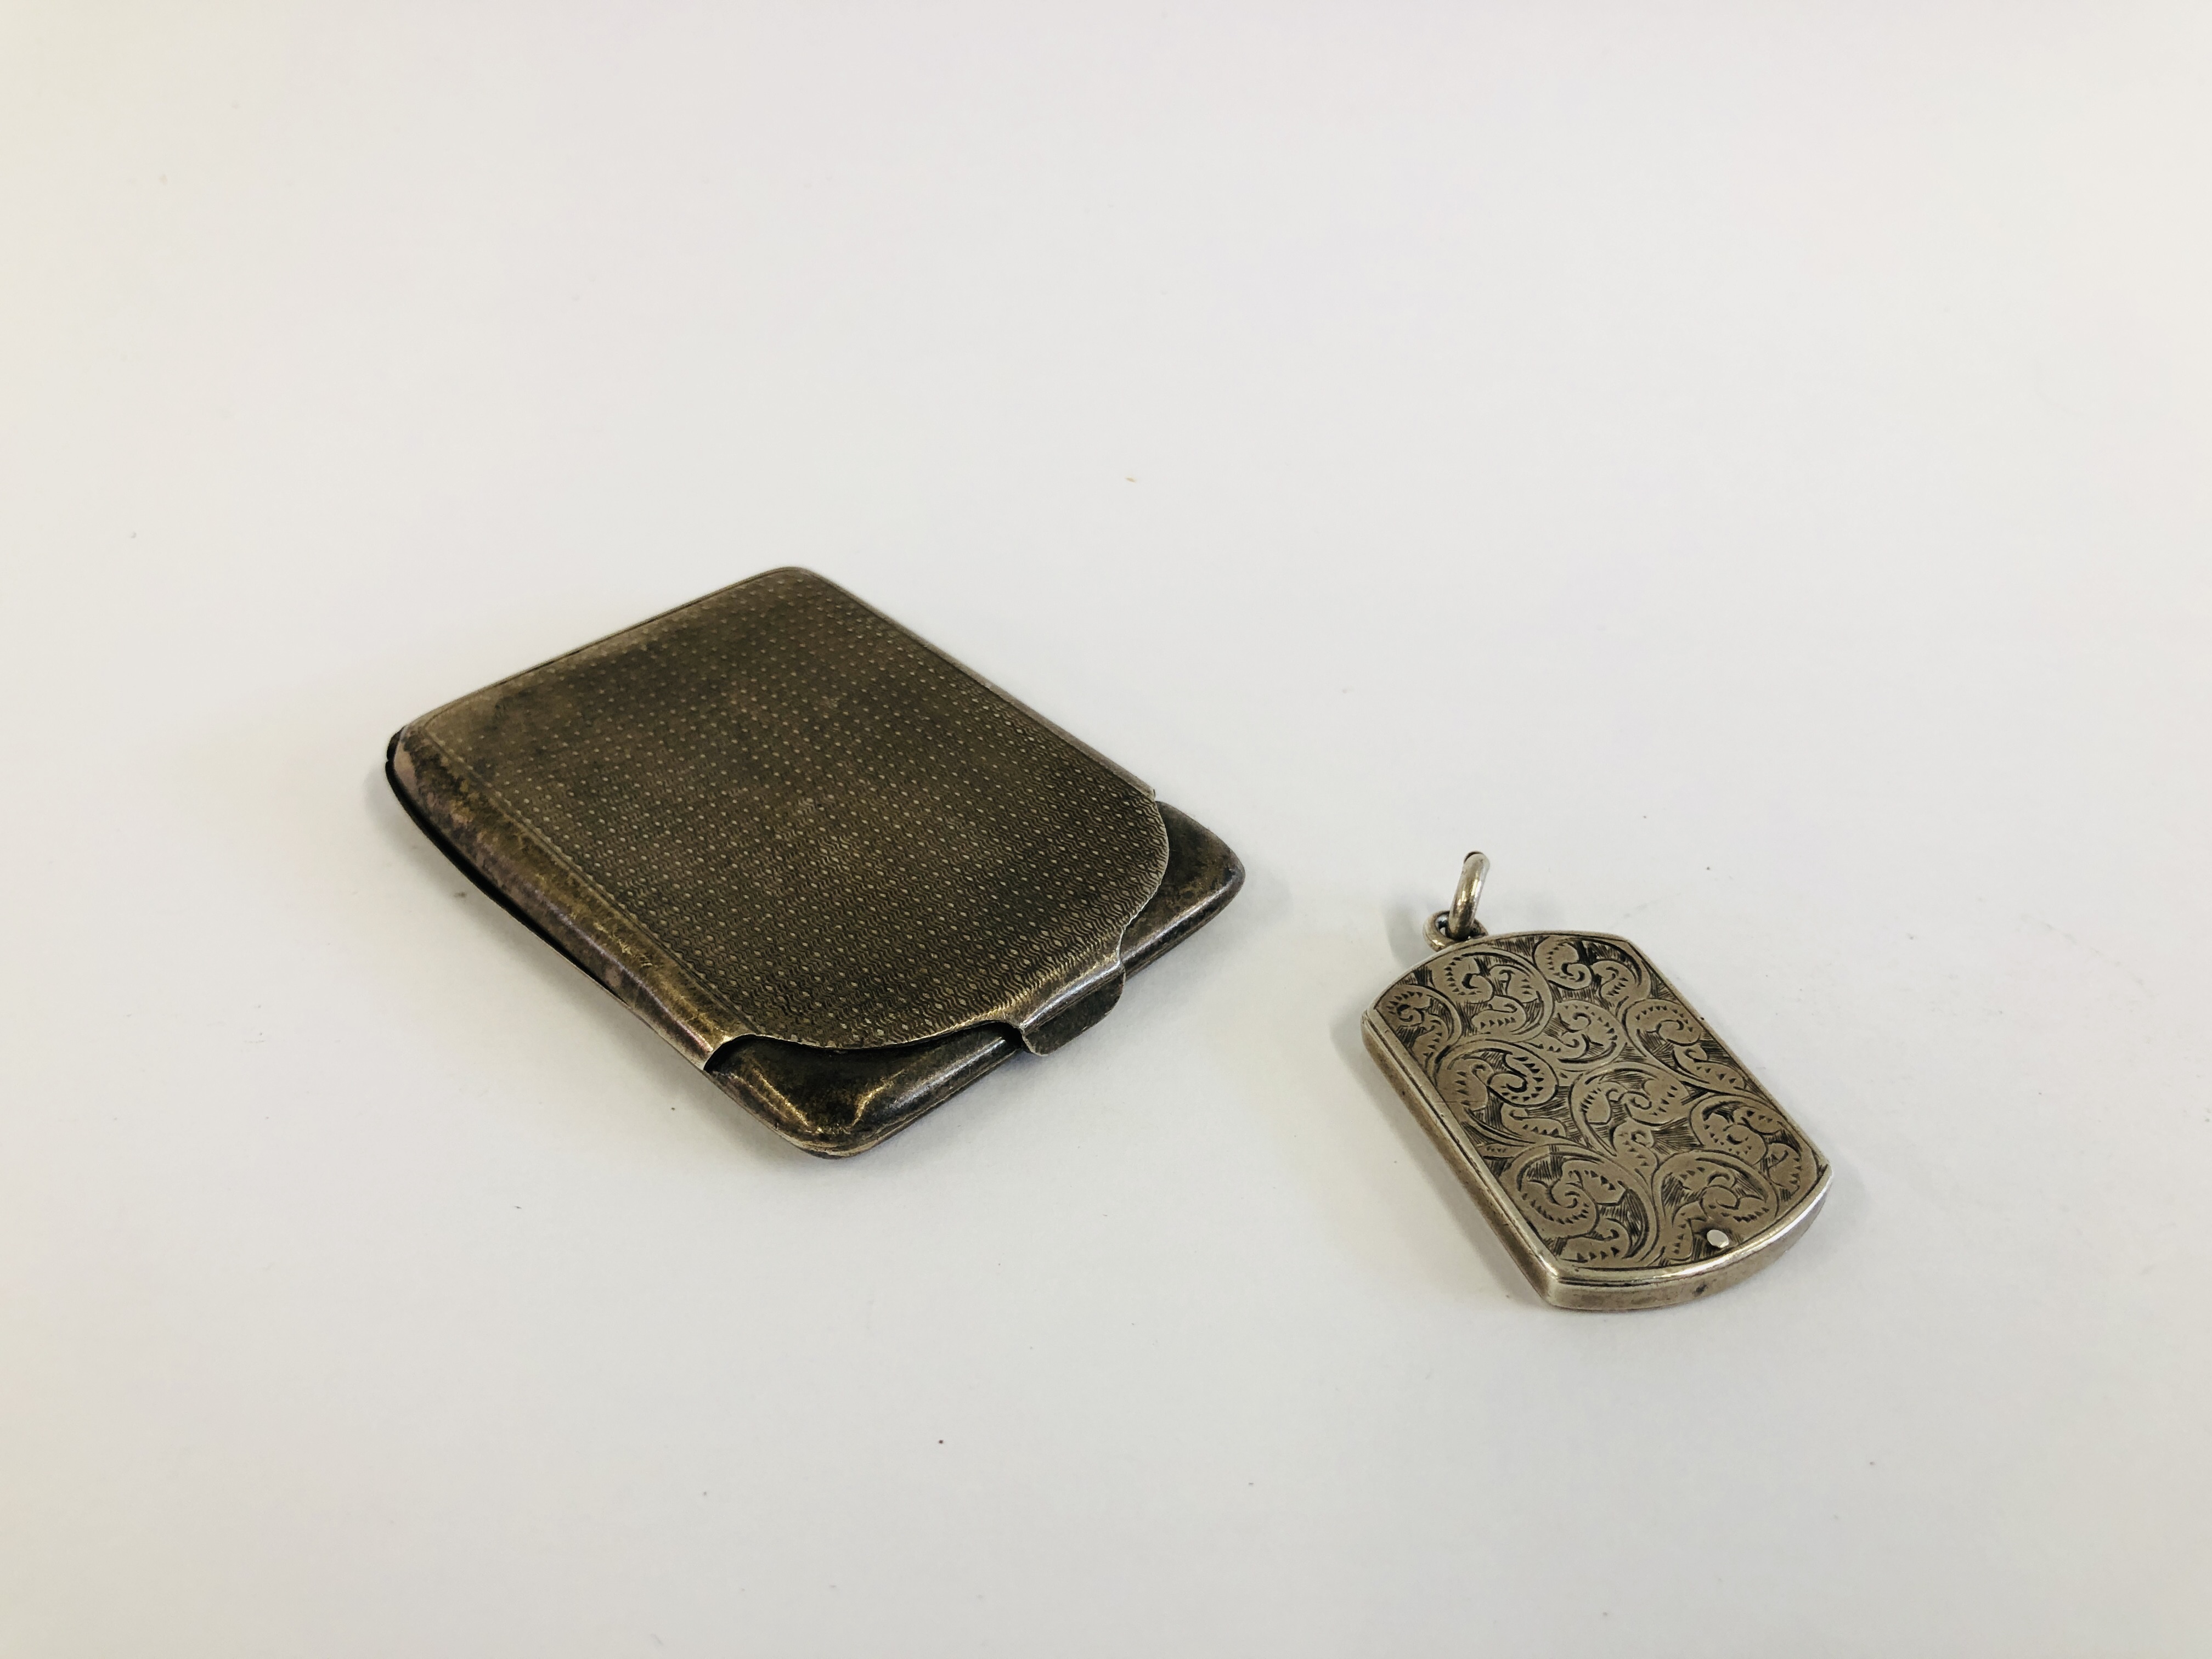 A SILVER STAMP HOLDER, CHESTER 1900 ALONG WITH A SILVER STAMP CASE, BIRMINGHAM 1924.